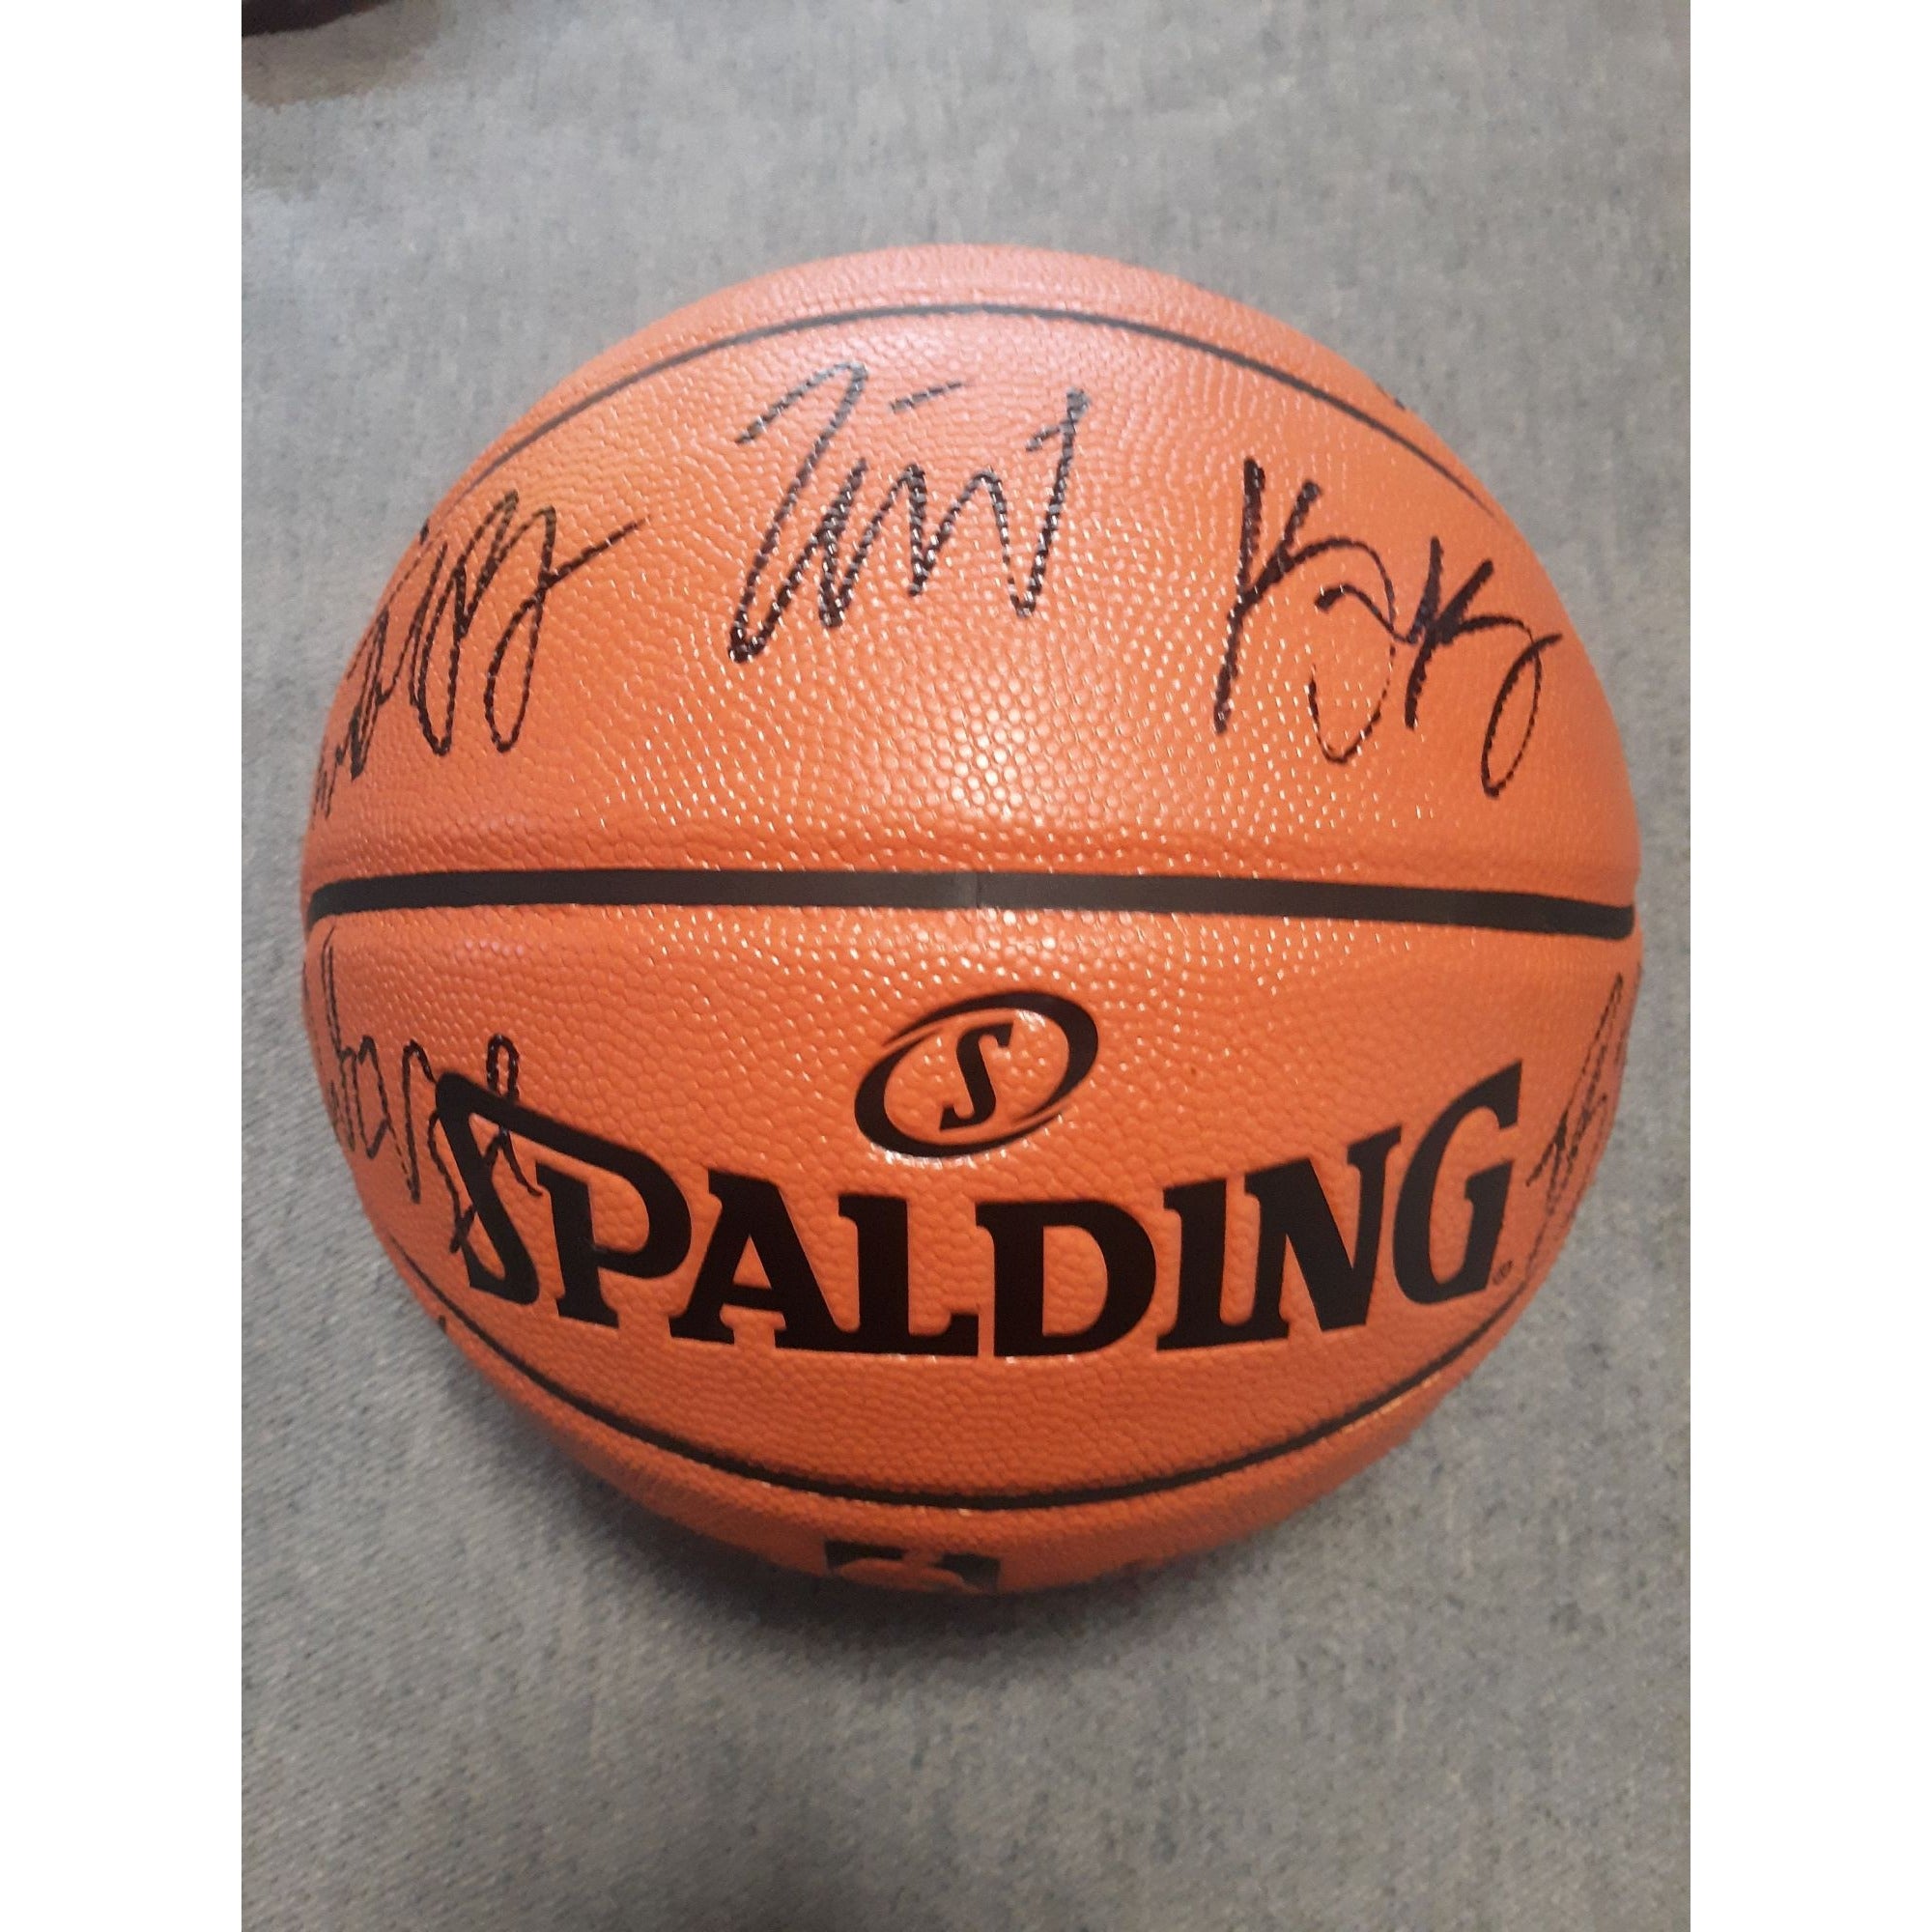 LeBron James, Anthony Davis 2019-20 Los Angeles Lakers team signed basketball with proof